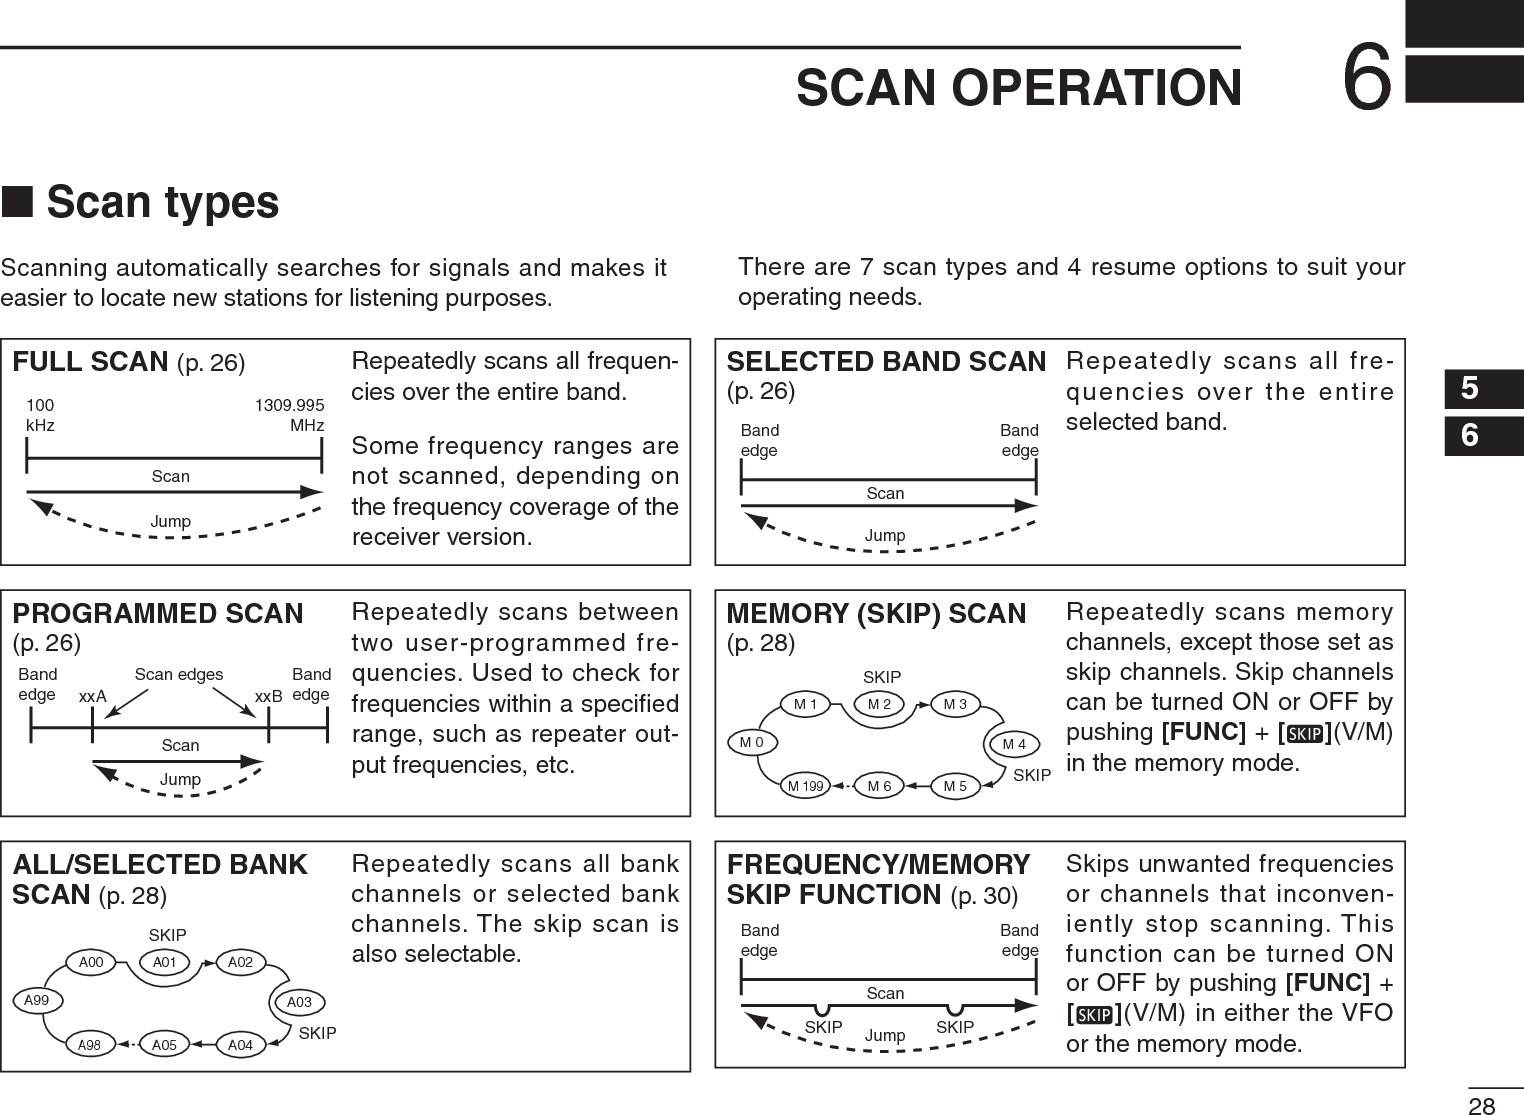 286SCAN OPERATION12345678910111213141516N Scan typesScanning automatically searches for signals and makes it easier to locate new stations for listening purposes.There are 7 scan types and 4 resume options to suit your operating needs.FULL SCAN (p. 26)100kHz1309.995MHzScanJumpRepeatedly scans all frequen-cies over the entire band.Some frequency ranges are not scanned, depending on the frequency coverage of the receiver version.SELECTED BAND SCAN (p. 26)BandedgeBandedgeScanJumpRepeatedly scans all fre-quencies over the entire selected band. ALL/SELECTED BANK SCAN (p. 28)SKIPSKIPA99 A03A00 A01 A02A04A98A05Repeatedly scans all bank channels or selected bank channels. The skip scan is also selectable.FREQUENCY/MEMORY SKIP FUNCTION (p. 30)BandedgeBandedgeScanSKIP SKIPJumpSkips unwanted frequencies  or channels that inconven-iently stop scanning. This function can be turned ON or OFF by pushing [FUNC] + [ ](V/M) in either the VFO or the memory mode.PROGRAMMED SCAN (p. 26)Bandedge xxA xxBBandedgeScan edgesScanJumpRepeatedly scans between two user-programmed fre-quencies. Used to check for frequencies within a speciﬁed range, such as repeater out-put frequencies, etc.MEMORY (SKIP) SCAN (p. 28)SKIPSKIPM0 M4M1 M2 M3M5M 199M6Repeatedly scans memory channels, except those set as skip channels. Skip channels can be turned ON or OFF by pushing [FUNC] + [ ](V/M)in the memory mode.